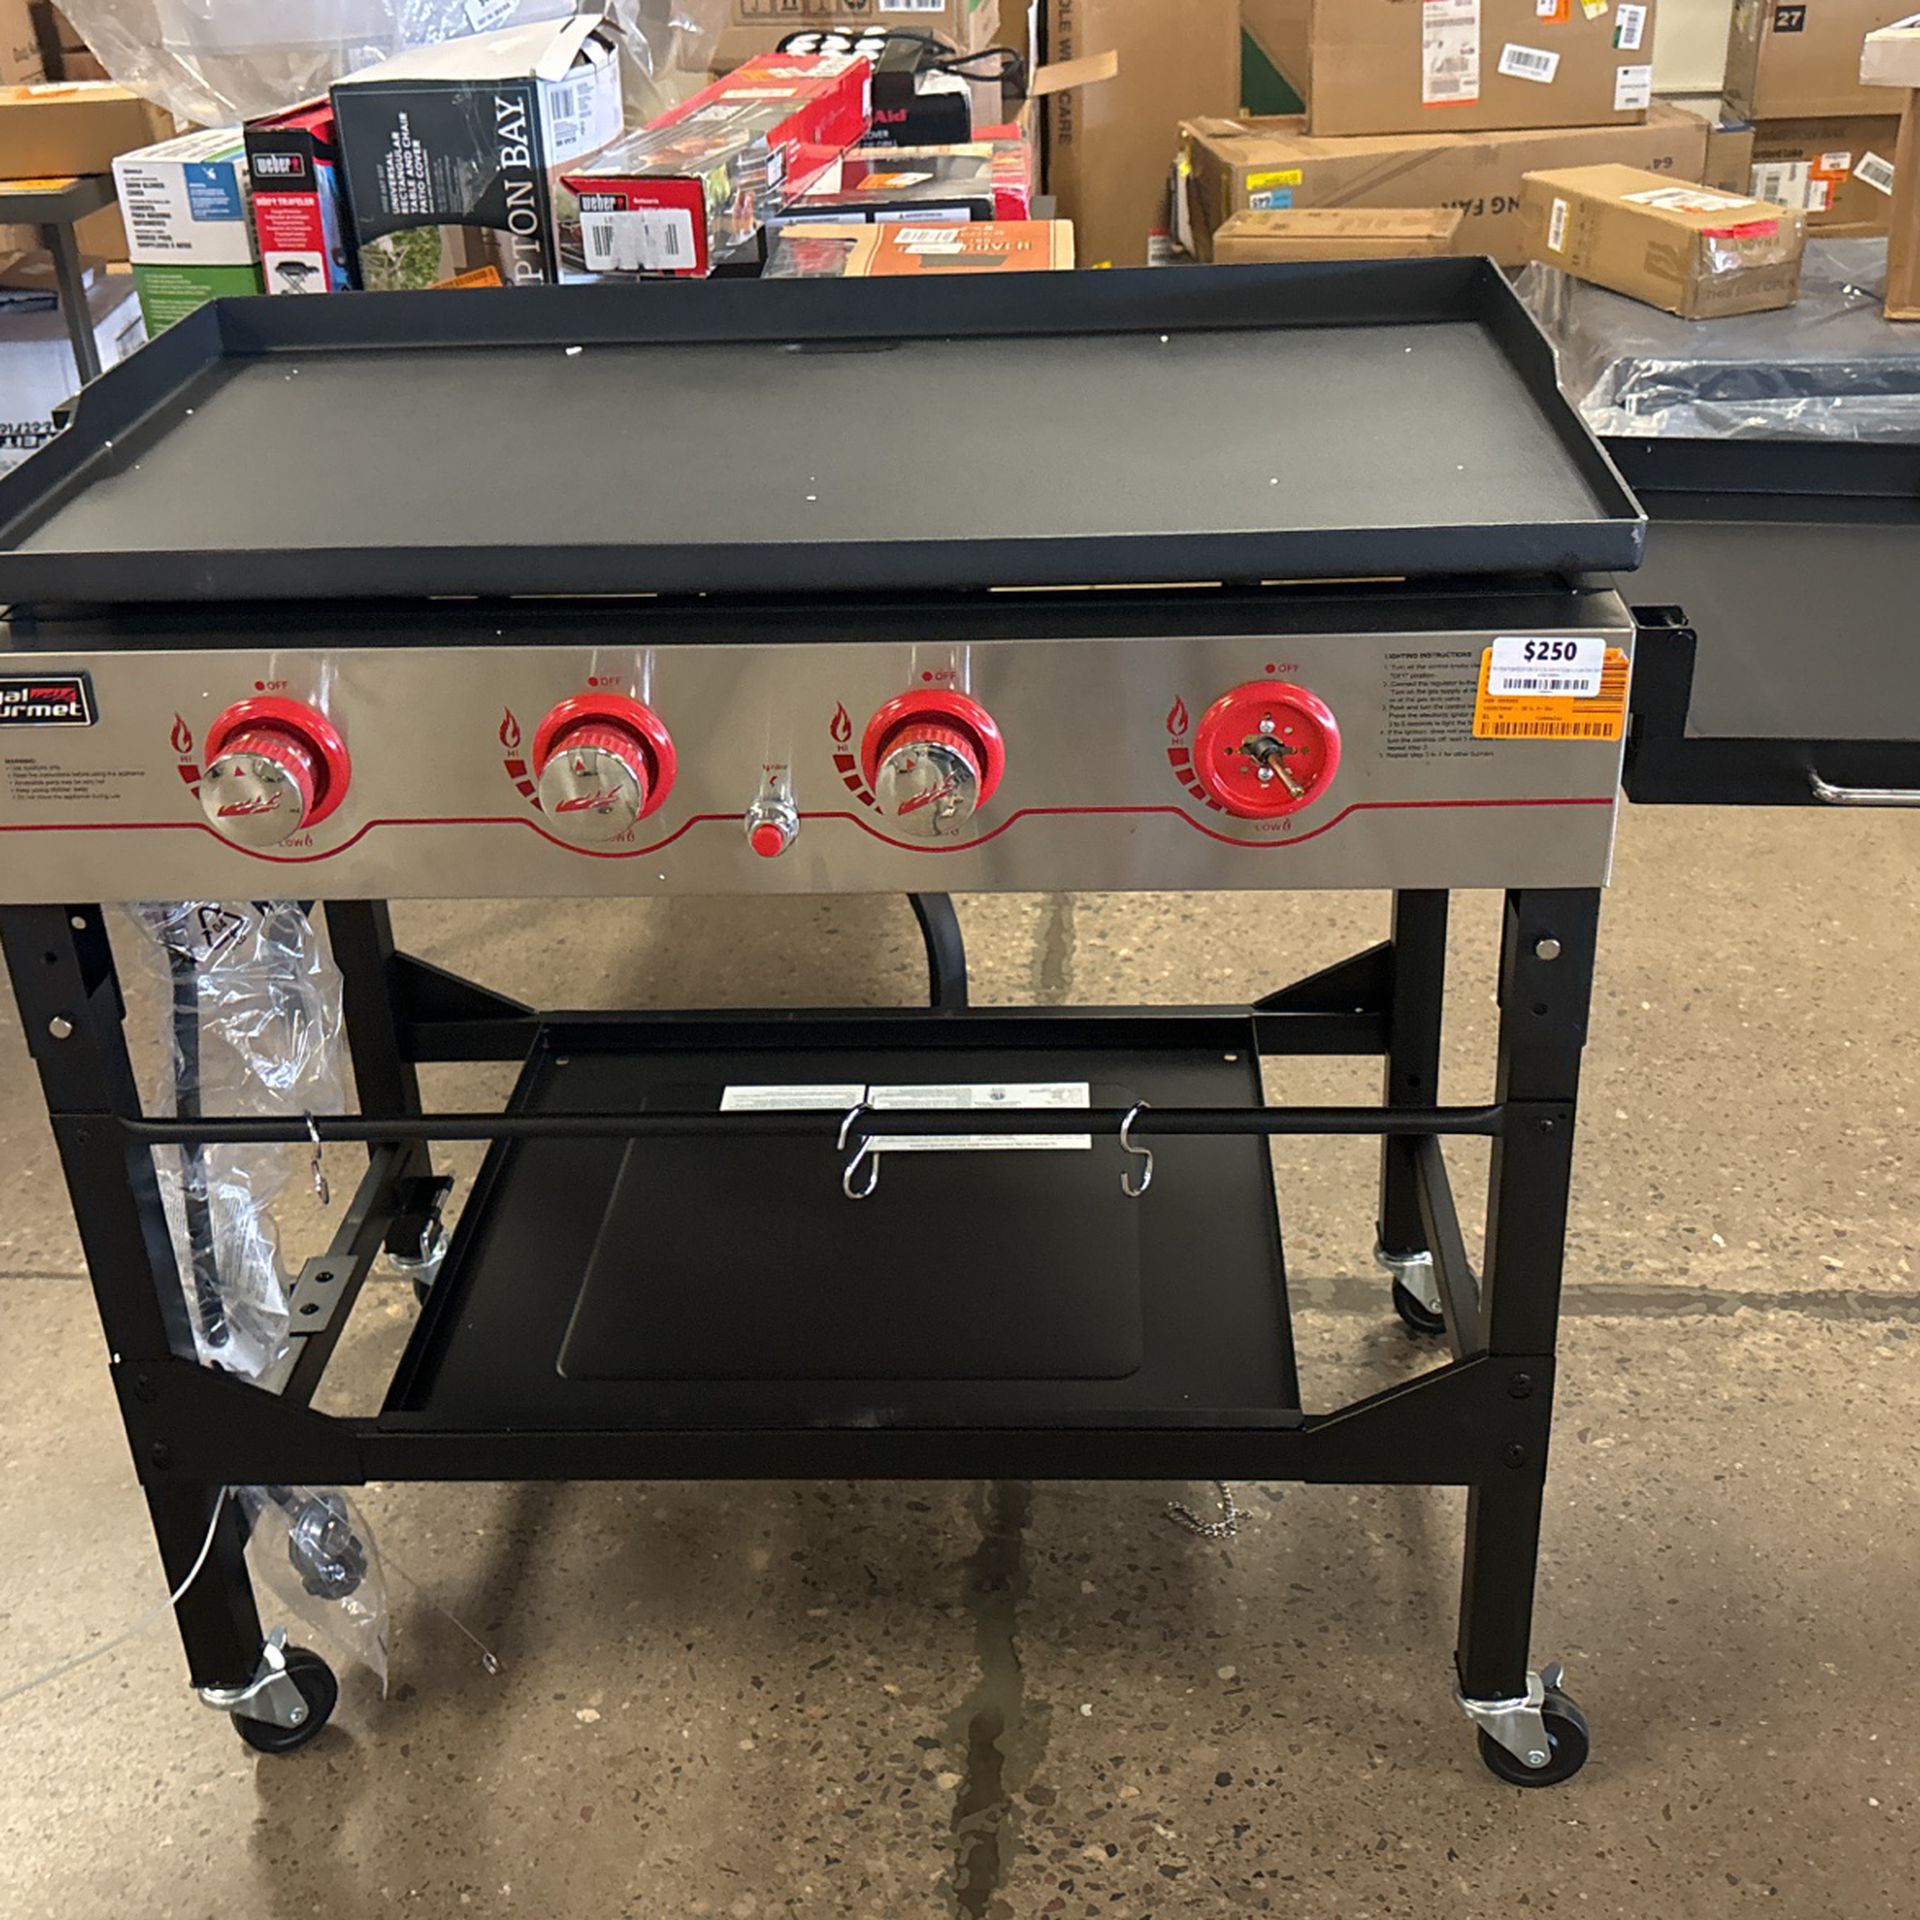 36 in. 4-Burner Propane BBQ Grill in Black Flat Top Gas Griddle with Top Cover Lid, for Large Outdoor Camping"